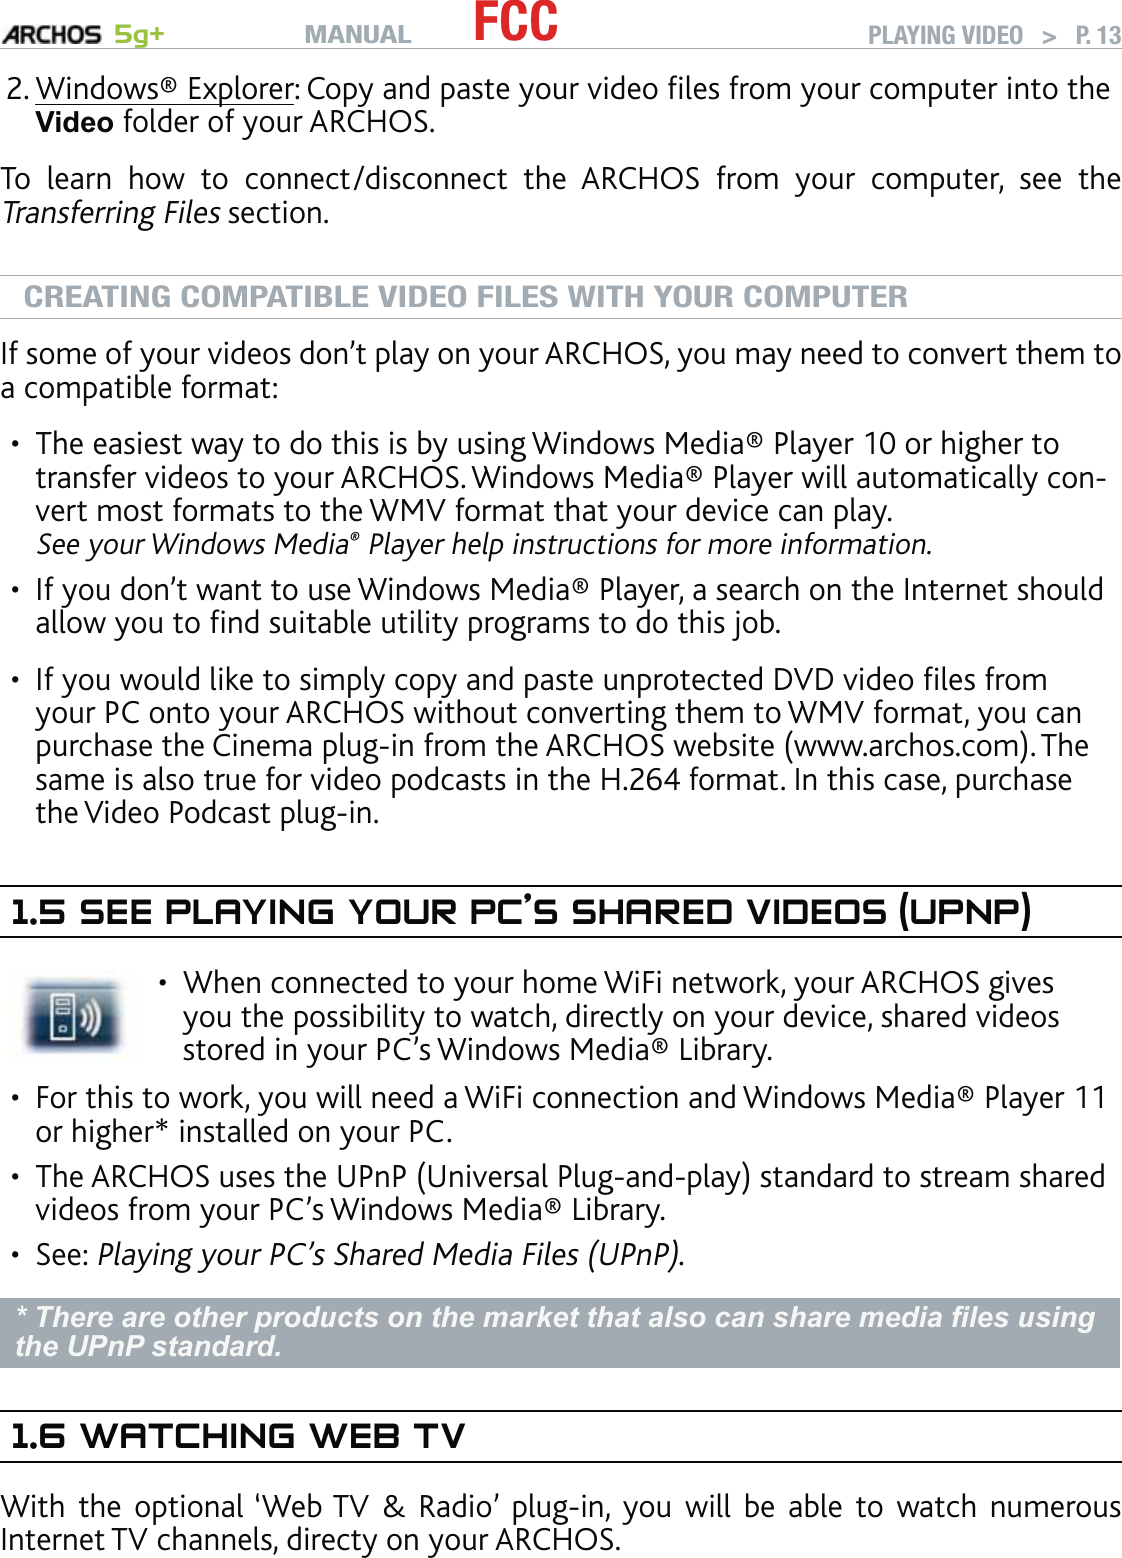 MANUAL 5g+ FCC PLAYING VIDEO   &gt;   P. 13Windows® Explorer: Copy and paste your video ﬁles from your computer into the Video folder of your ARCHOS.To learn how to connect/disconnect the ARCHOS from your computer, see the Transferring Files section.CREATING COMPATIBLE VIDEO FILES WITH YOUR COMPUTERIf some of your videos don’t play on your ARCHOS, you may need to convert them to a compatible format:The easiest way to do this is by using Windows Media® Player 10 or higher to transfer videos to your ARCHOS. Windows Media® Player will automatically con-vert most formats to the WMV format that your device can play.  See your Windows Media® Player help instructions for more information.If you don’t want to use Windows Media® Player, a search on the Internet should allow you to ﬁnd suitable utility programs to do this job.If you would like to simply copy and paste unprotected DVD video ﬁles from your PC onto your ARCHOS without converting them to WMV format, you can purchase the Cinema plug-in from the ARCHOS website (www.archos.com). The same is also true for video podcasts in the H.264 format. In this case, purchase the Video Podcast plug-in.1.5 SEE PLAYING YOUR PC’S SHARED VIDEOS (UPNP)When connected to your home WiFi network, your ARCHOS gives you the possibility to watch, directly on your device, shared videos stored in your PC’s Windows Media® Library.•For this to work, you will need a WiFi connection and Windows Media® Player 11 or higher* installed on your PC.The ARCHOS uses the UPnP (Universal Plug-and-play) standard to stream shared videos from your PC’s Windows Media® Library.See: Playing your PC’s Shared Media Files (UPnP). * There are other products on the market that also can share media ﬁles using the UPnP standard.1.6 WATCHING WEB TVWith the optional ‘Web TV &amp; Radio’ plug-in, you will be able to watch numerous Internet TV channels, directy on your ARCHOS.2.••••••